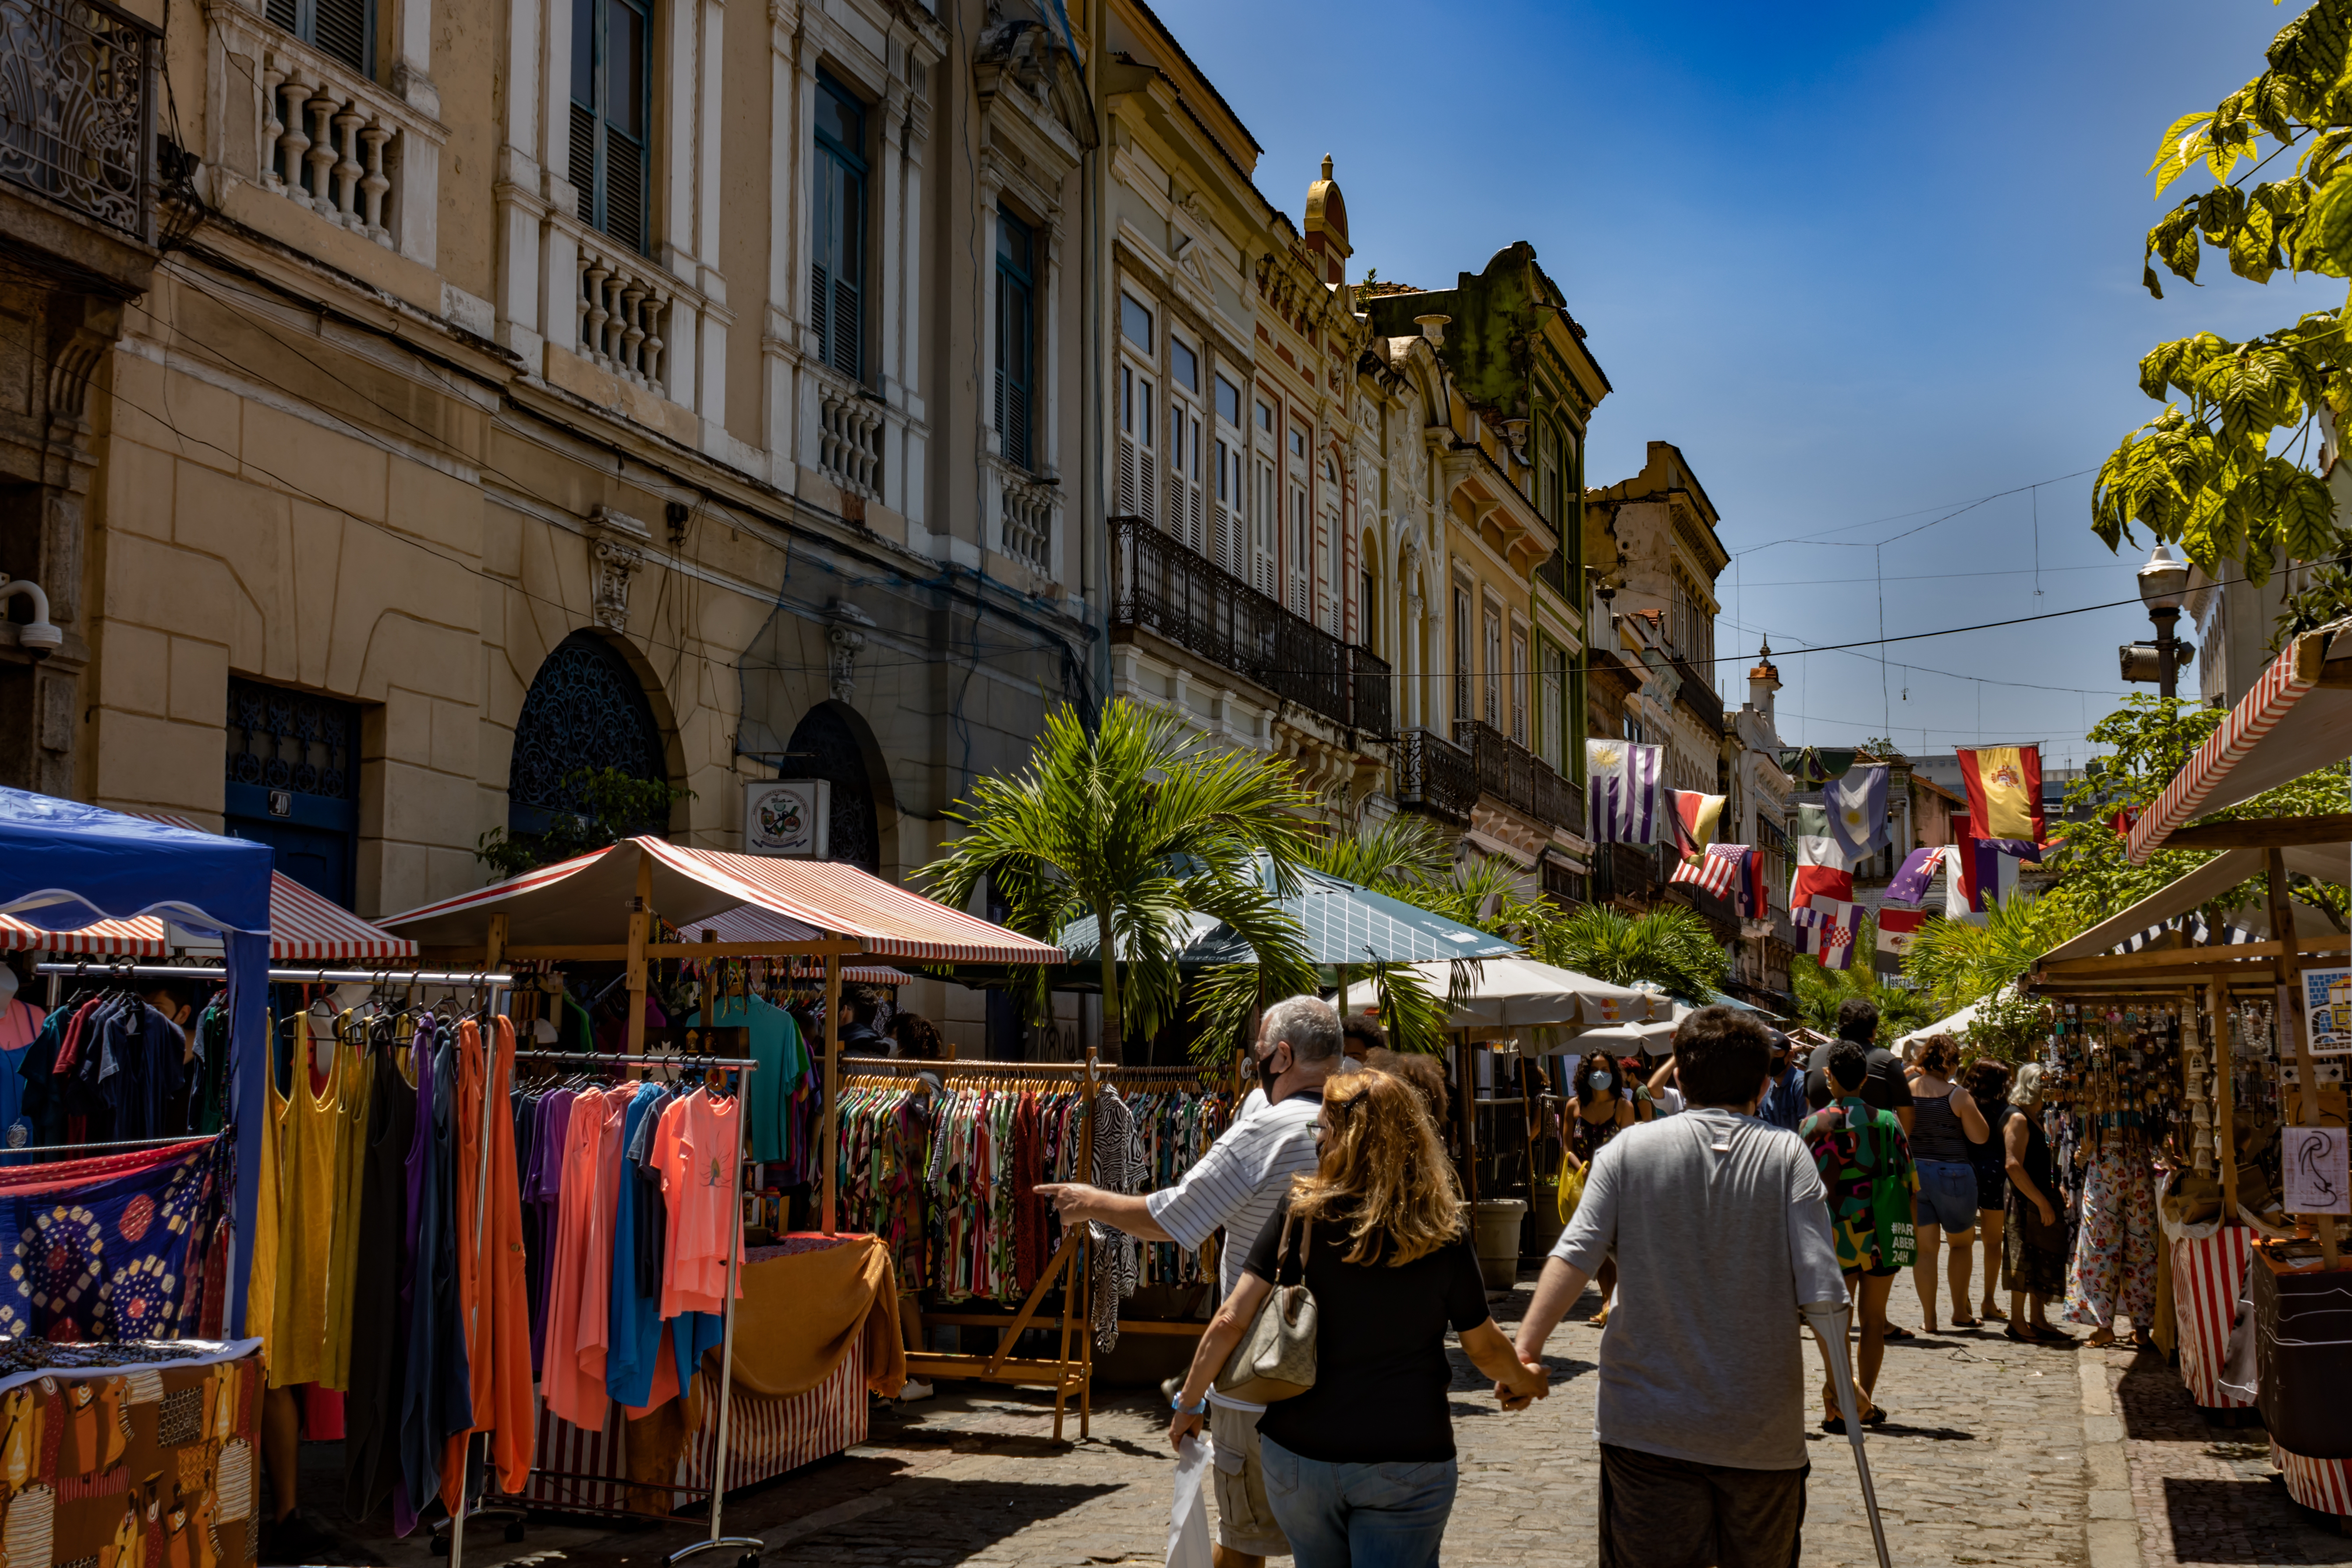 A street market on a tree-lined avenue in sunny Rio. People in summer clothes wander between stalls that are pressed against the bottom of old, terraced stone buildings with cast-iron balconies. The stalls are mostly selling clothing. A number of flags hang above the street, including the Spanish, Mexican and Croatian flags.